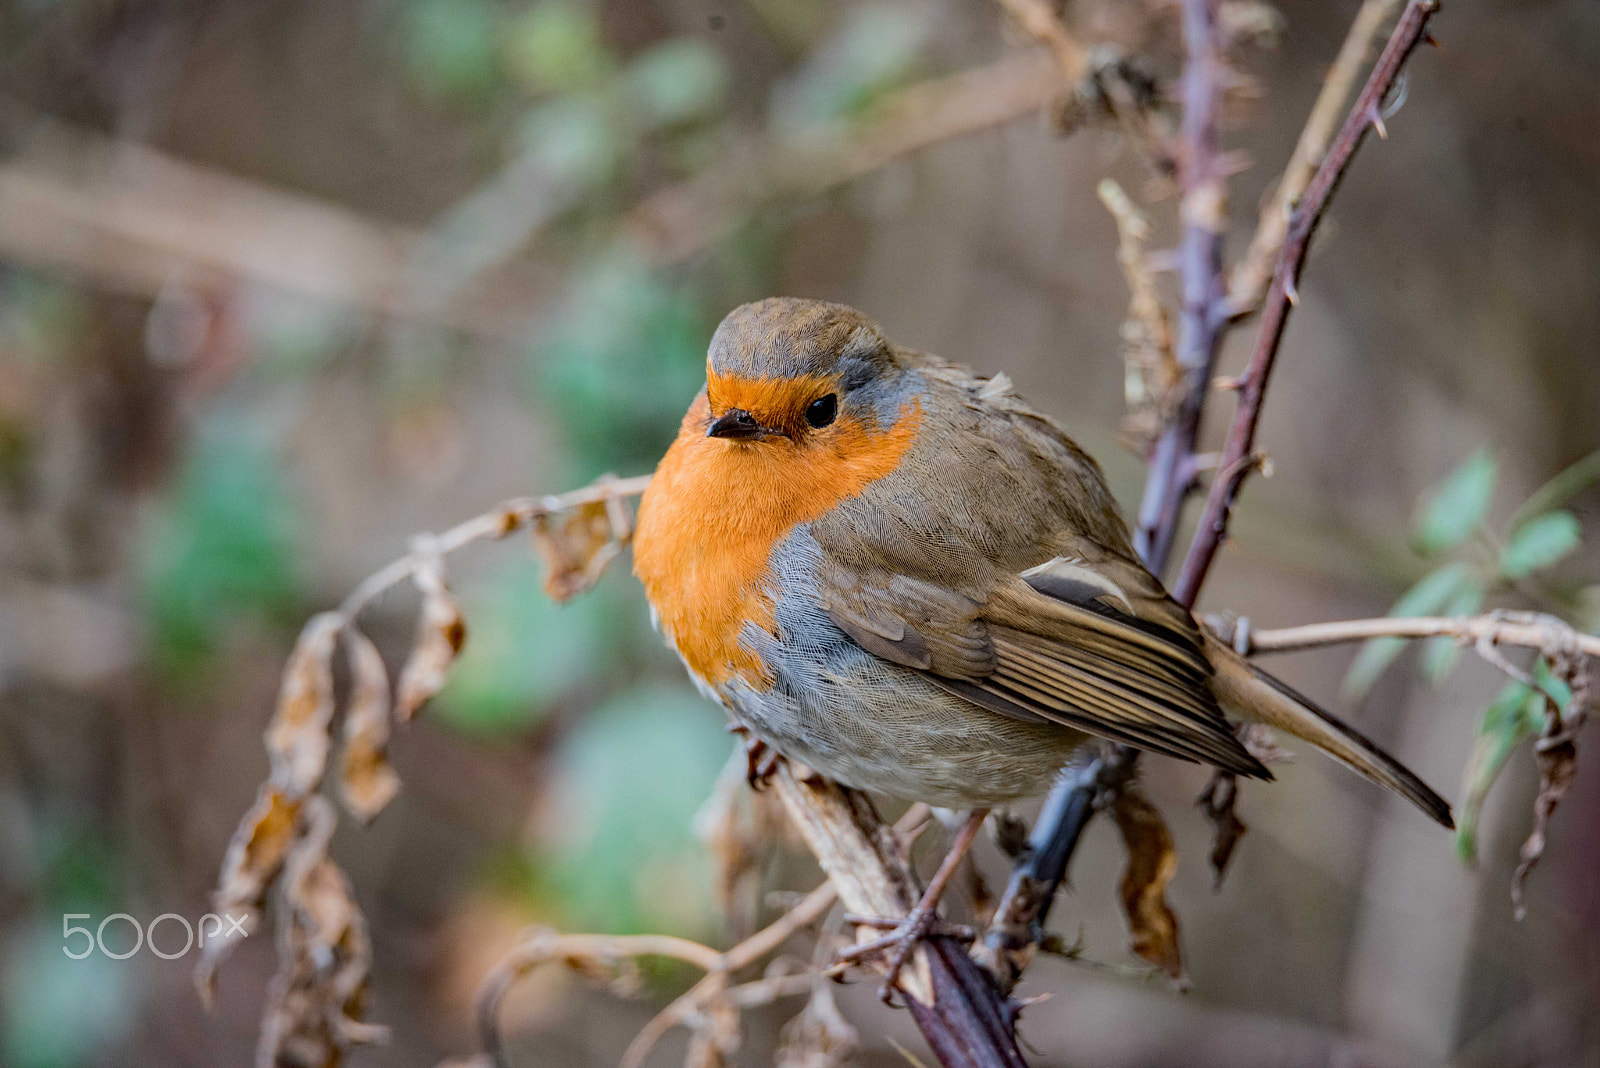 Nikon D750 sample photo. Yet another robin photography